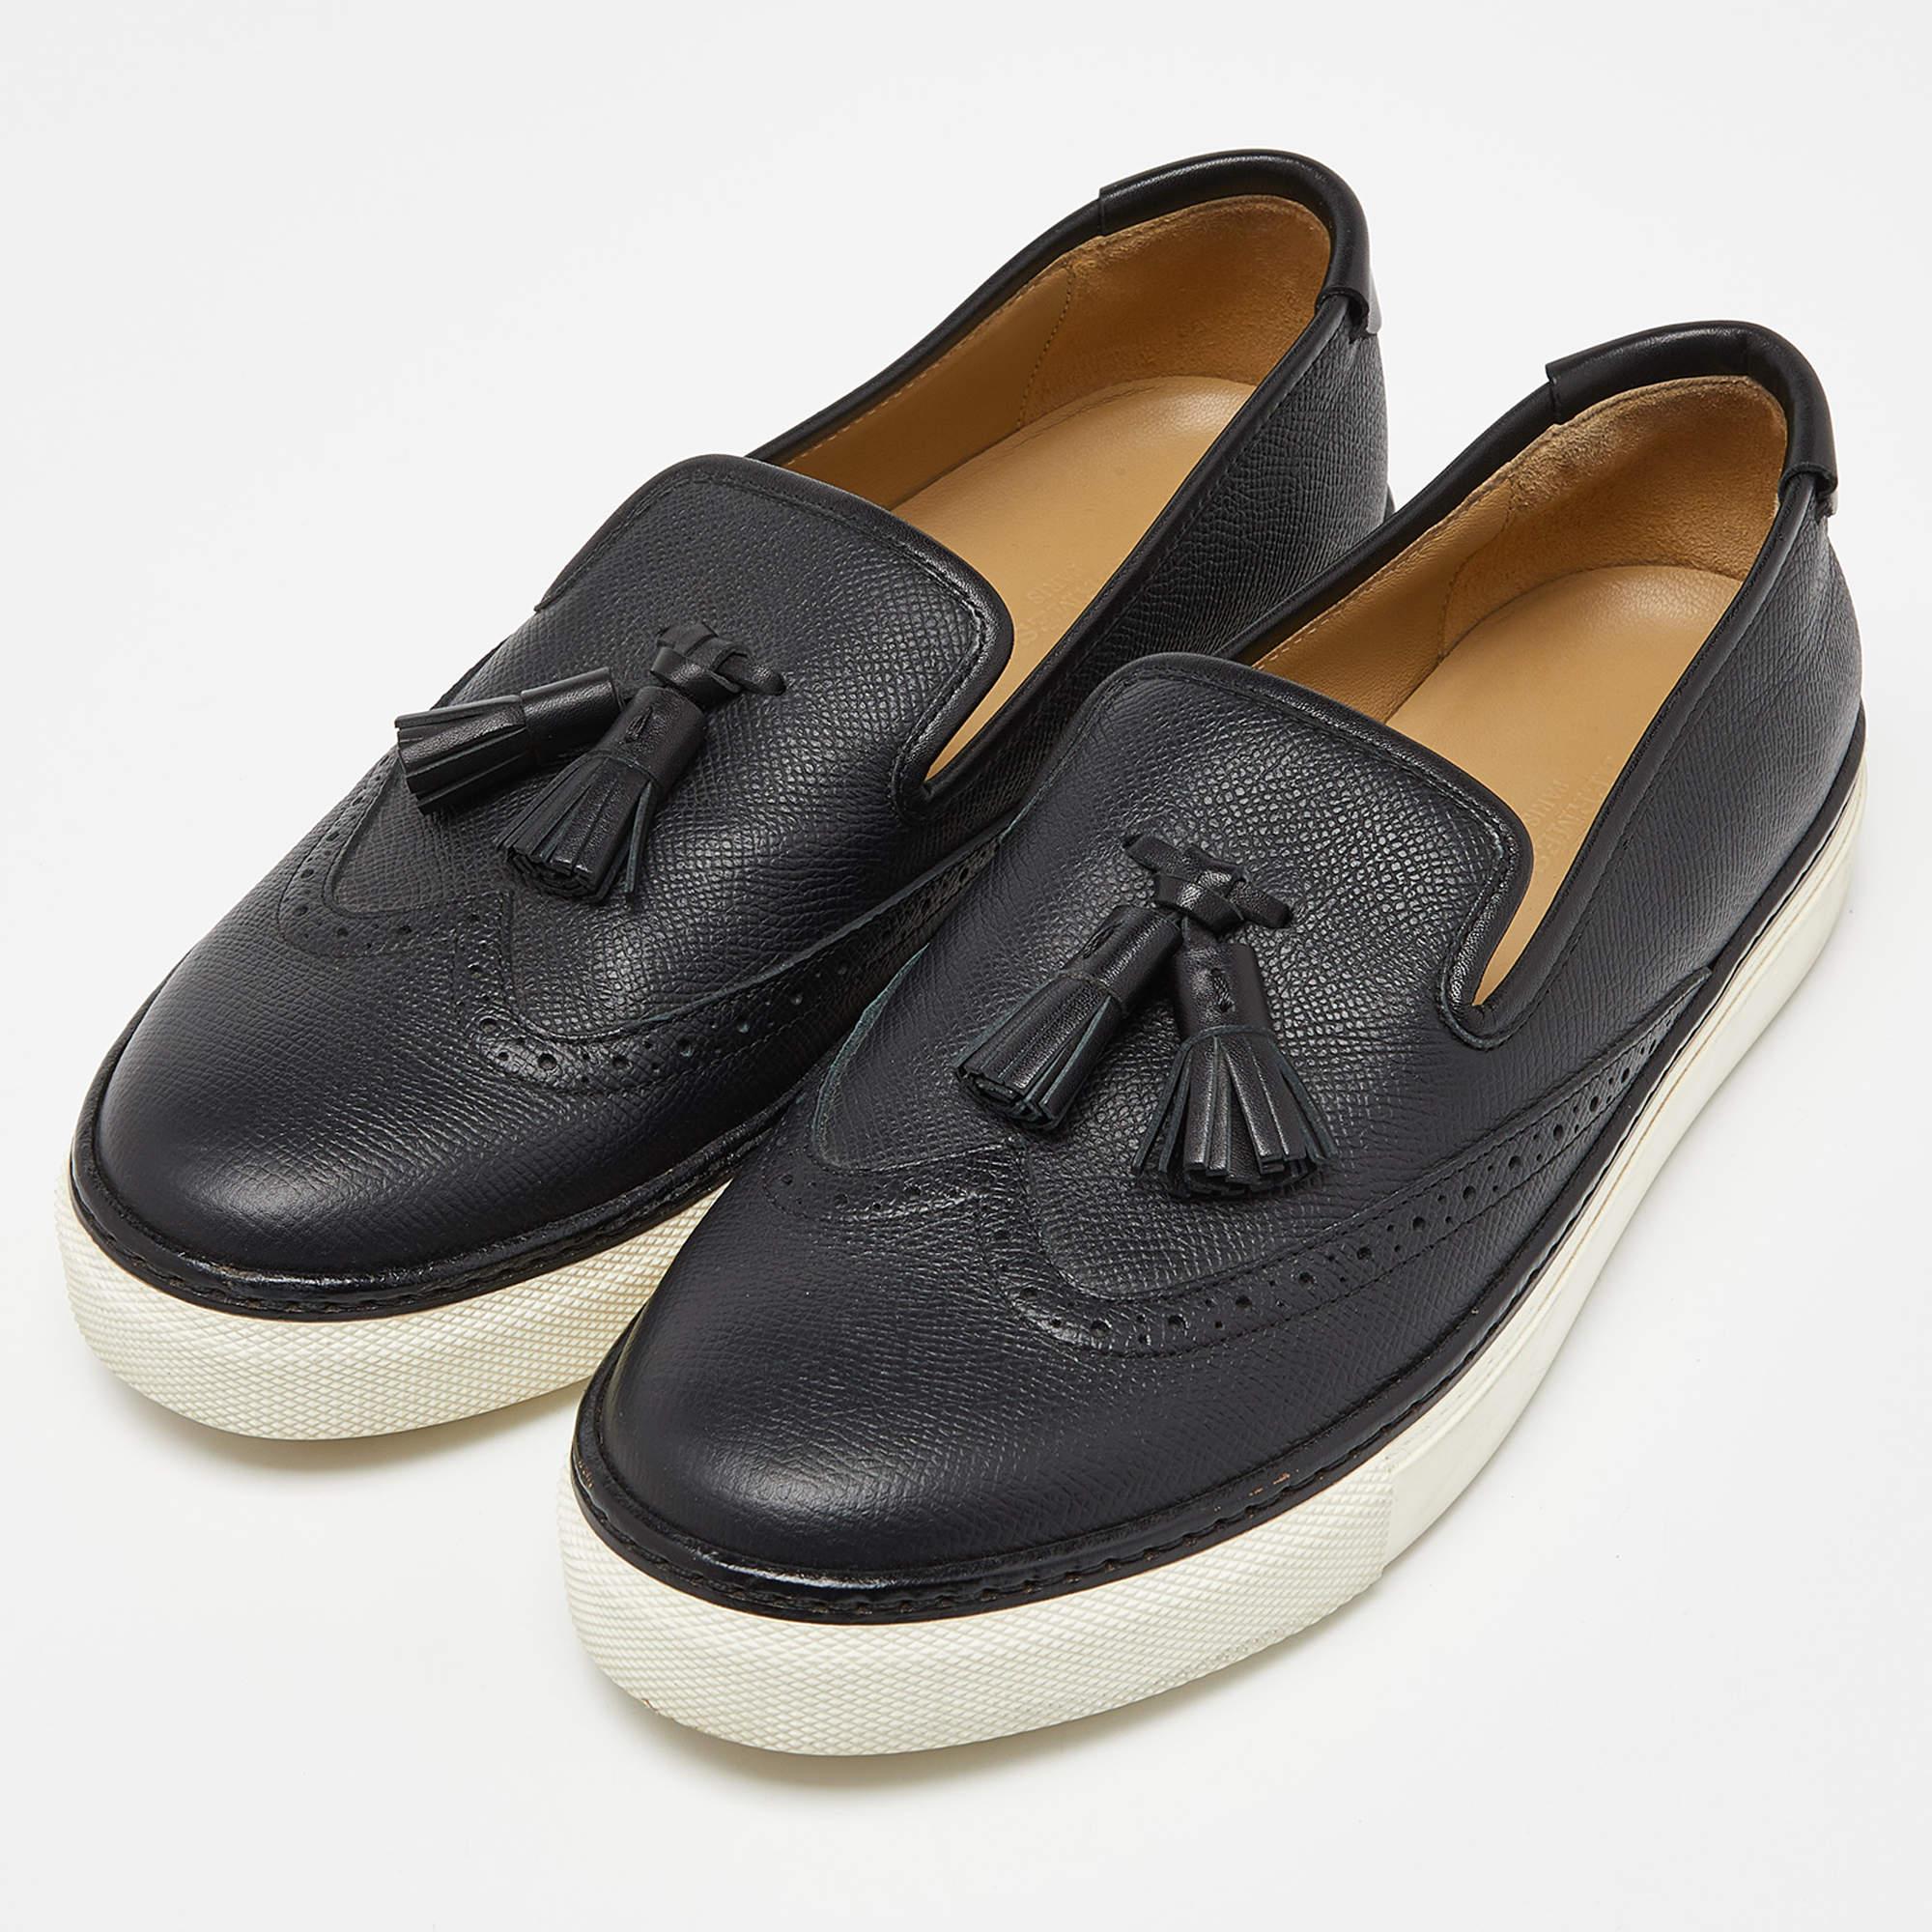 The Hermès sneakers exude sophistication with their premium black leather and meticulous brogue detailing. Featuring a stylish tassel accent, these sneakers seamlessly blend formal and casual elements, providing a luxurious and versatile footwear